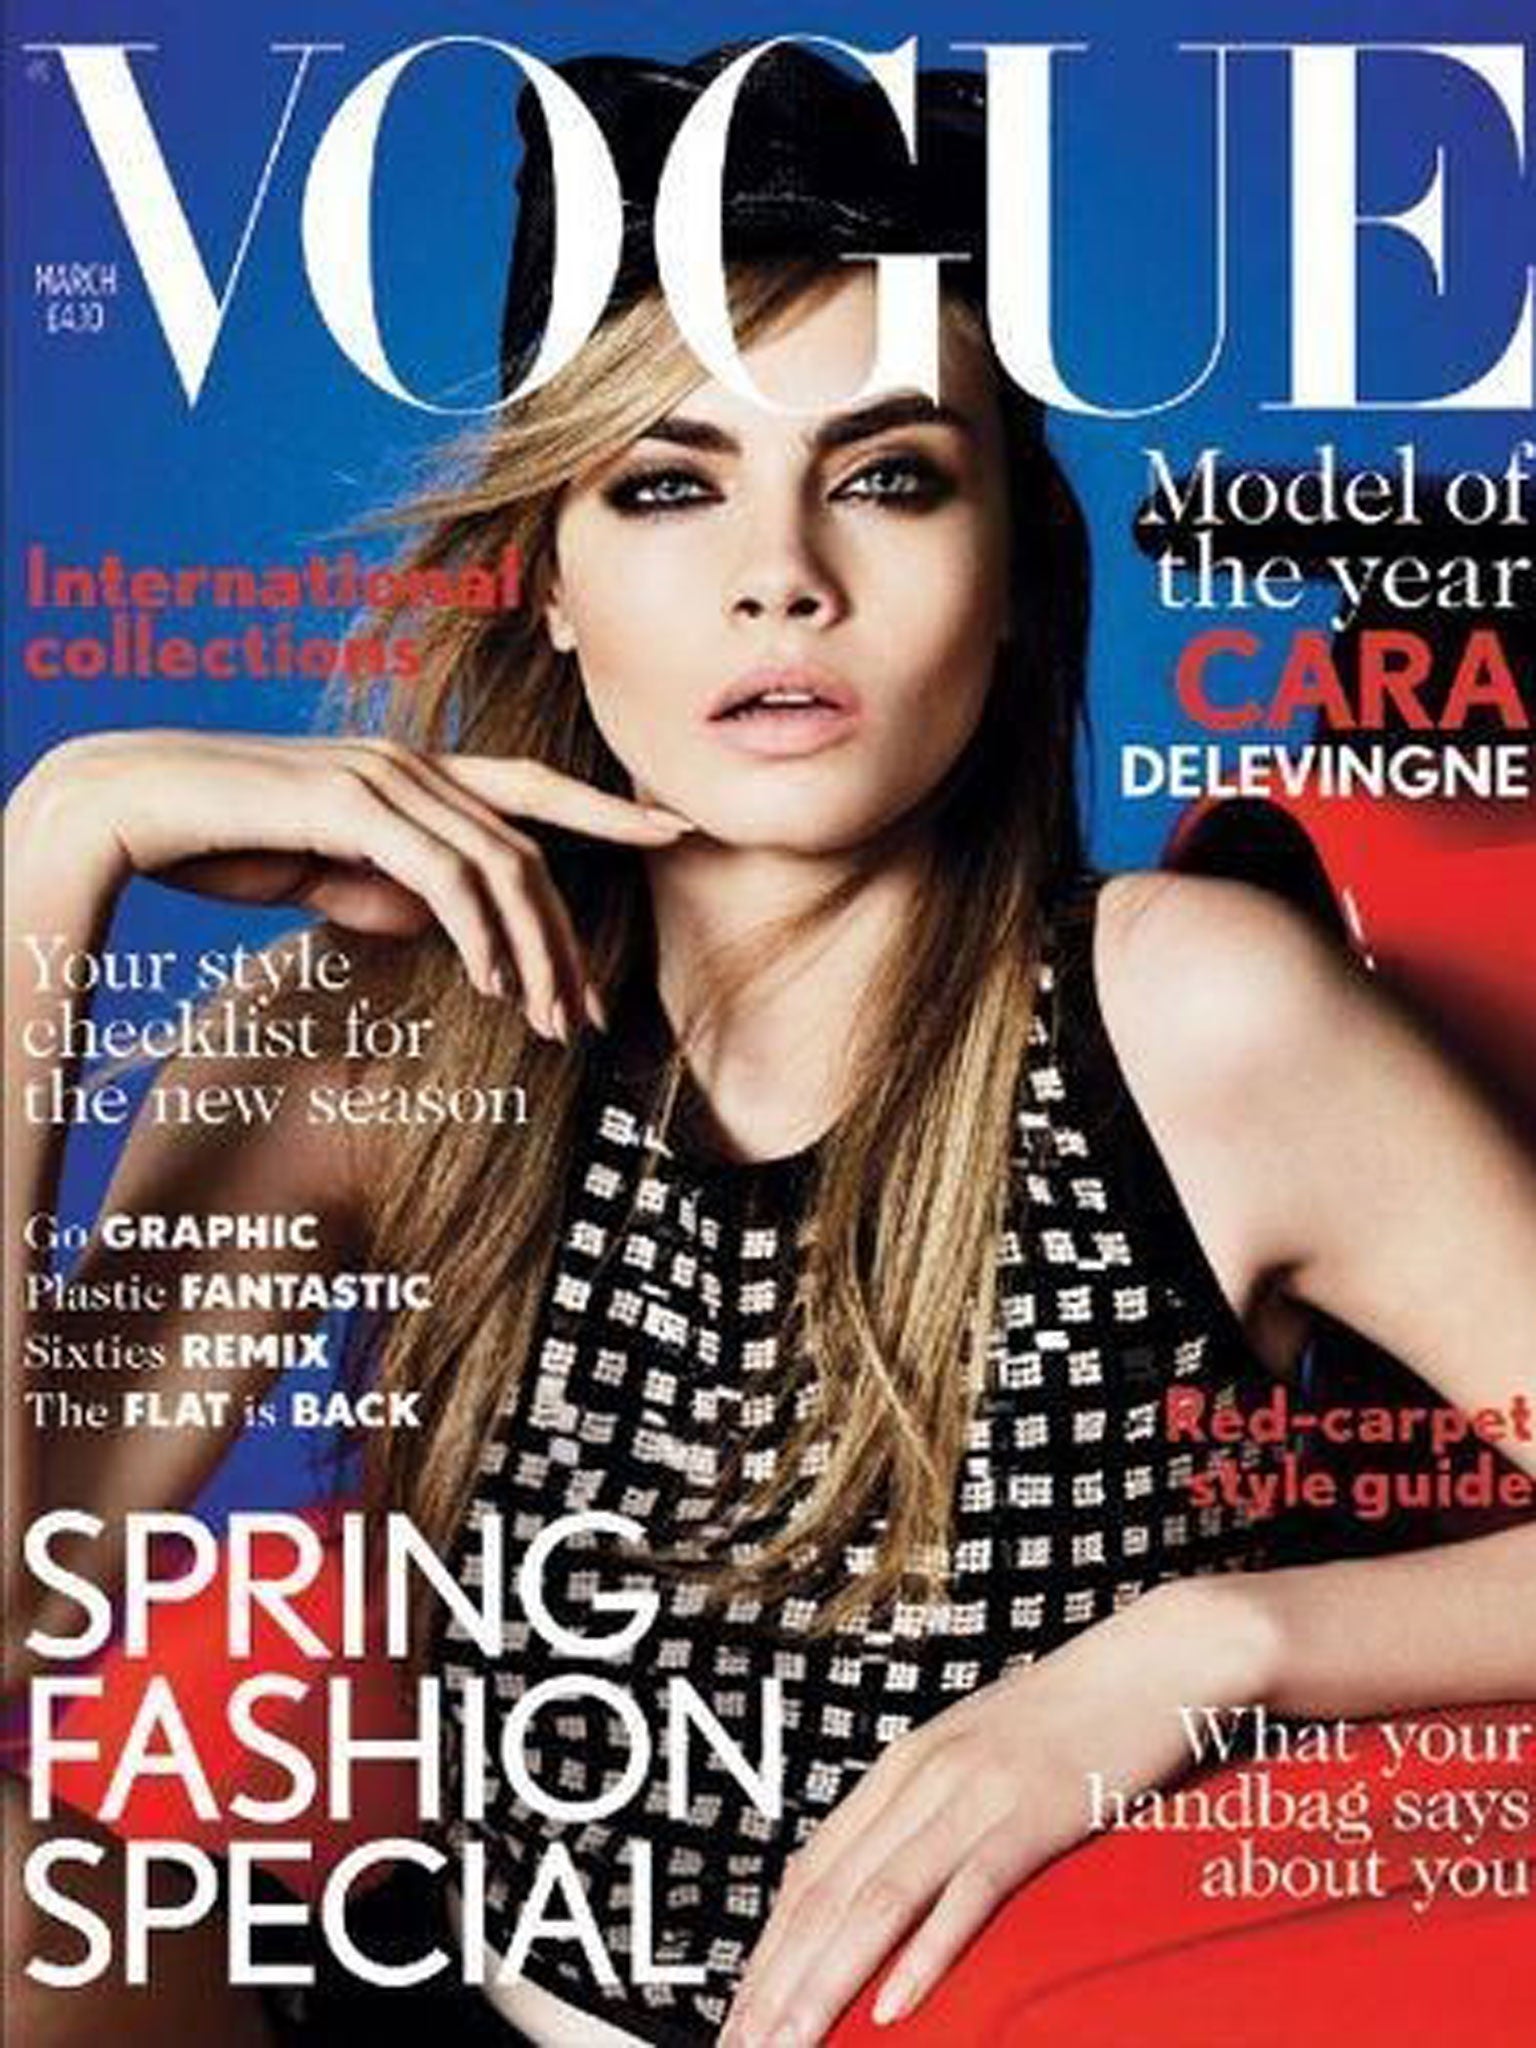 Vogue Festival is just one of the project from the Conde Nast magazine